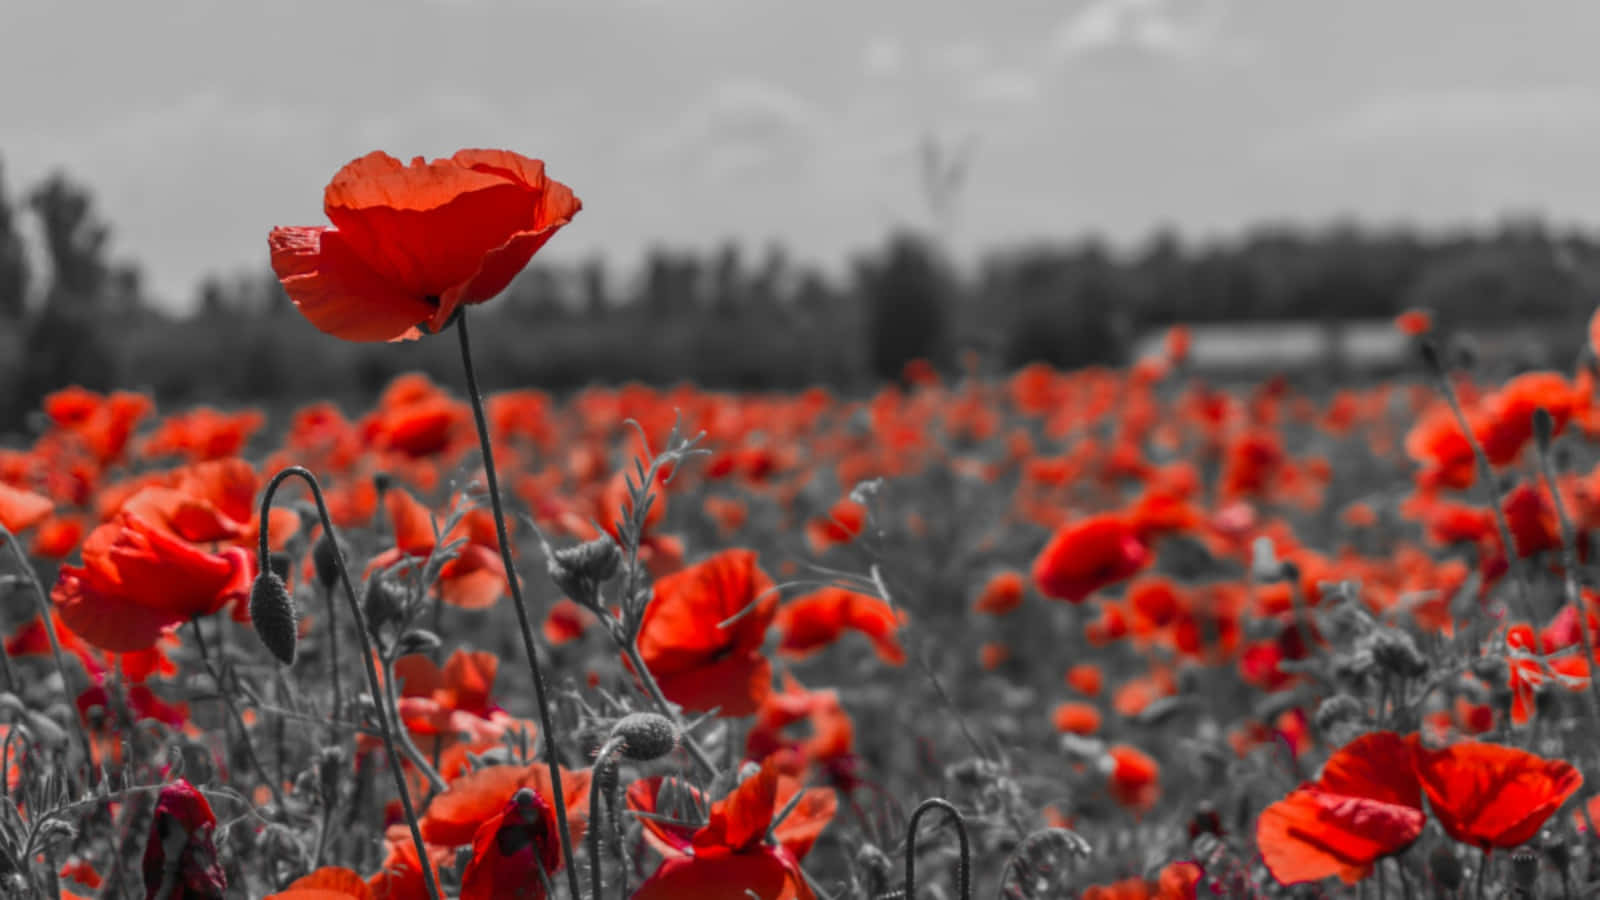 A Field Of Red Poppies In Black And White